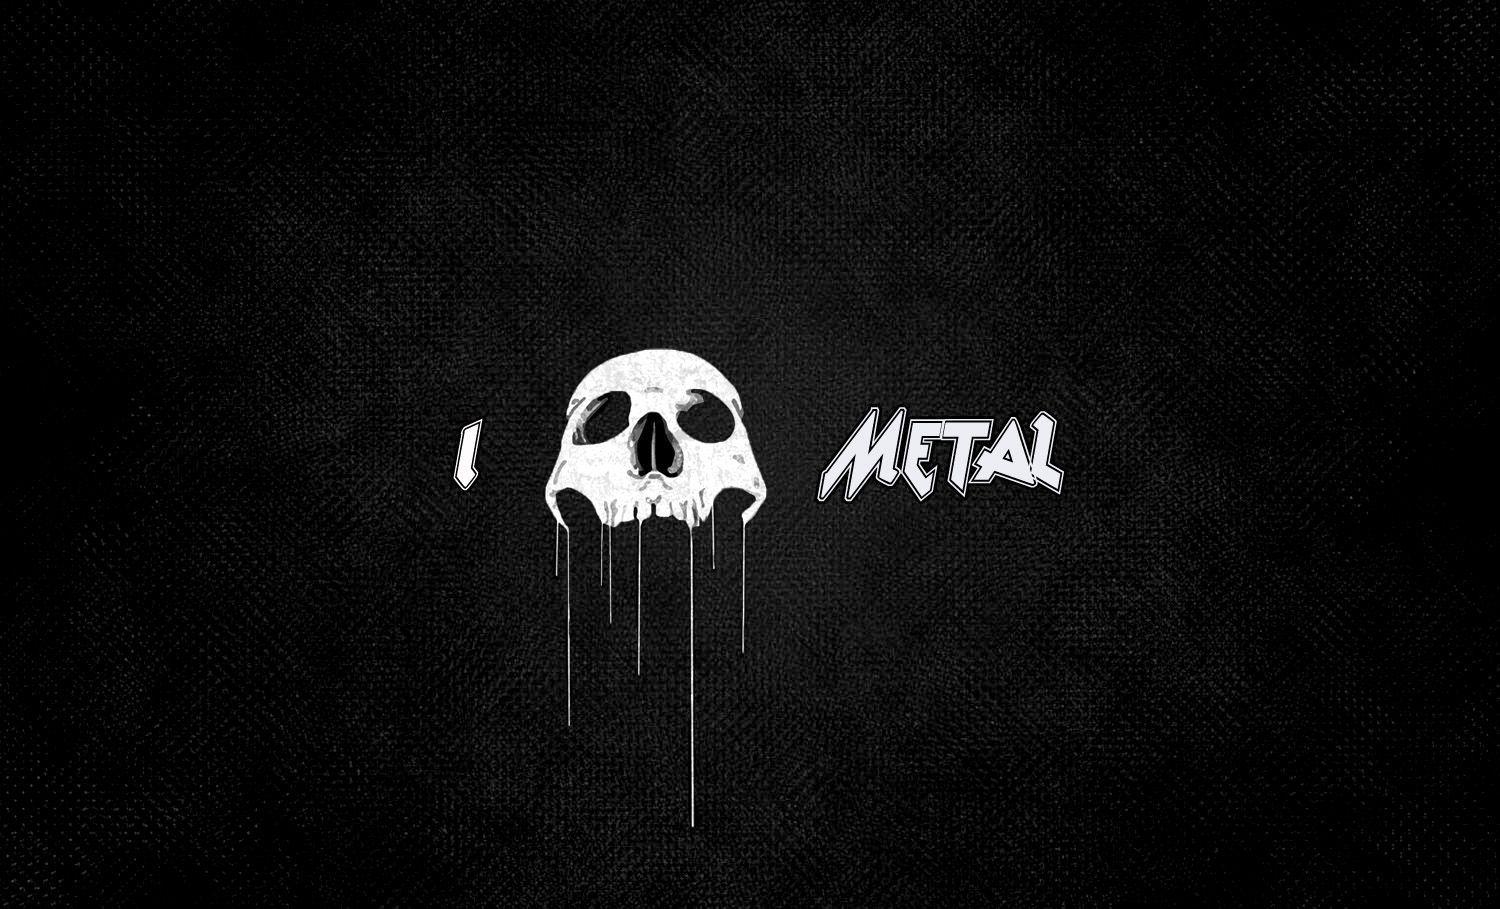 Music Metal Quotes. Free heavy metal wallpaper background. Music